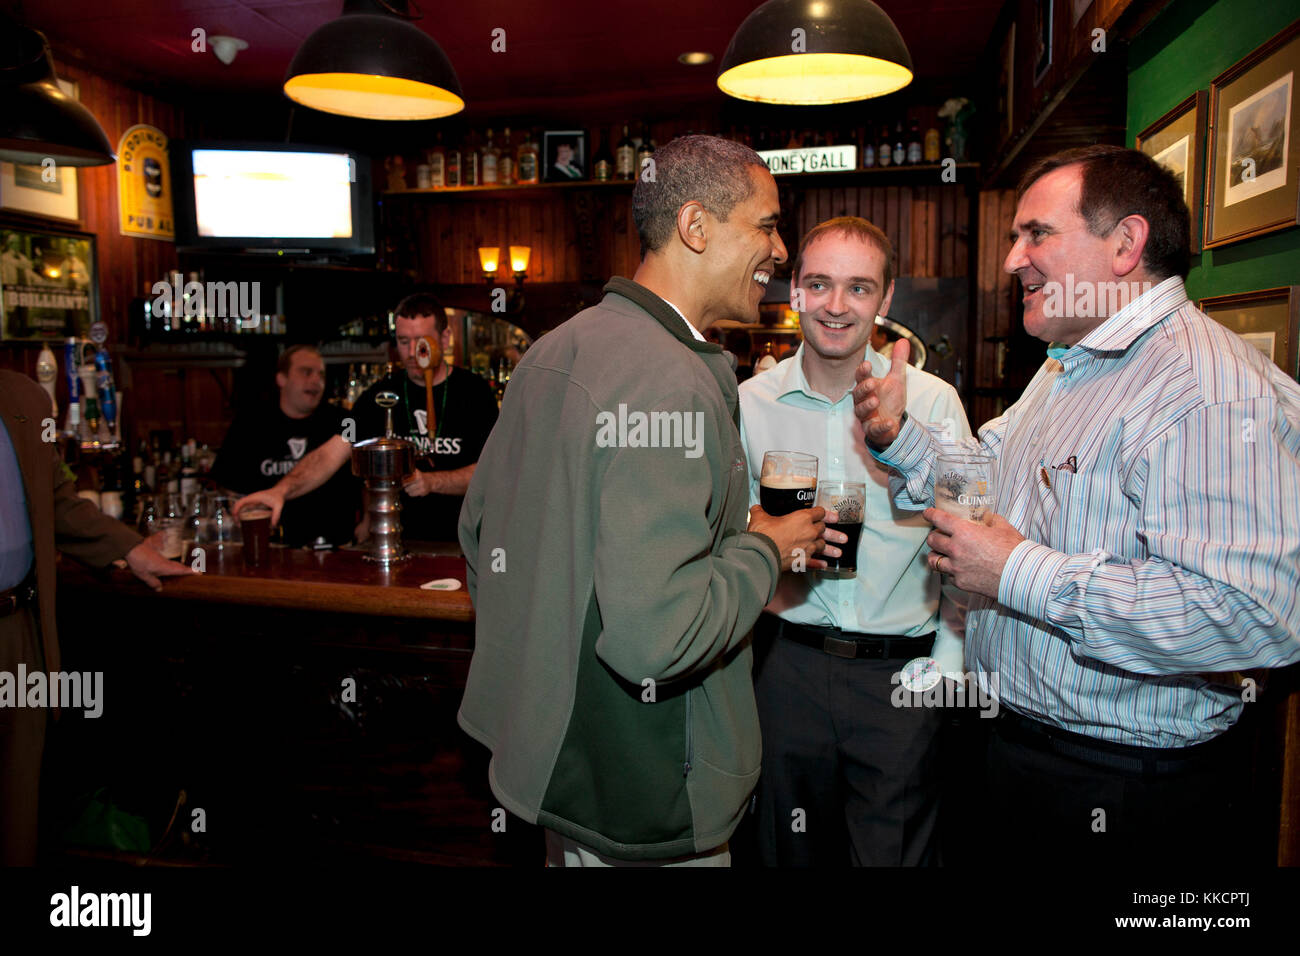 President Barack Obama visits the Dubliner, an Irish pub in Washington, D.C., with his Irish cousin, Henry Healy, center, and Ollie Hayes, a pub owner in Moneygall, Ireland, right, on St. Patrick's Day, Saturday, March 17, 2012. Stock Photo